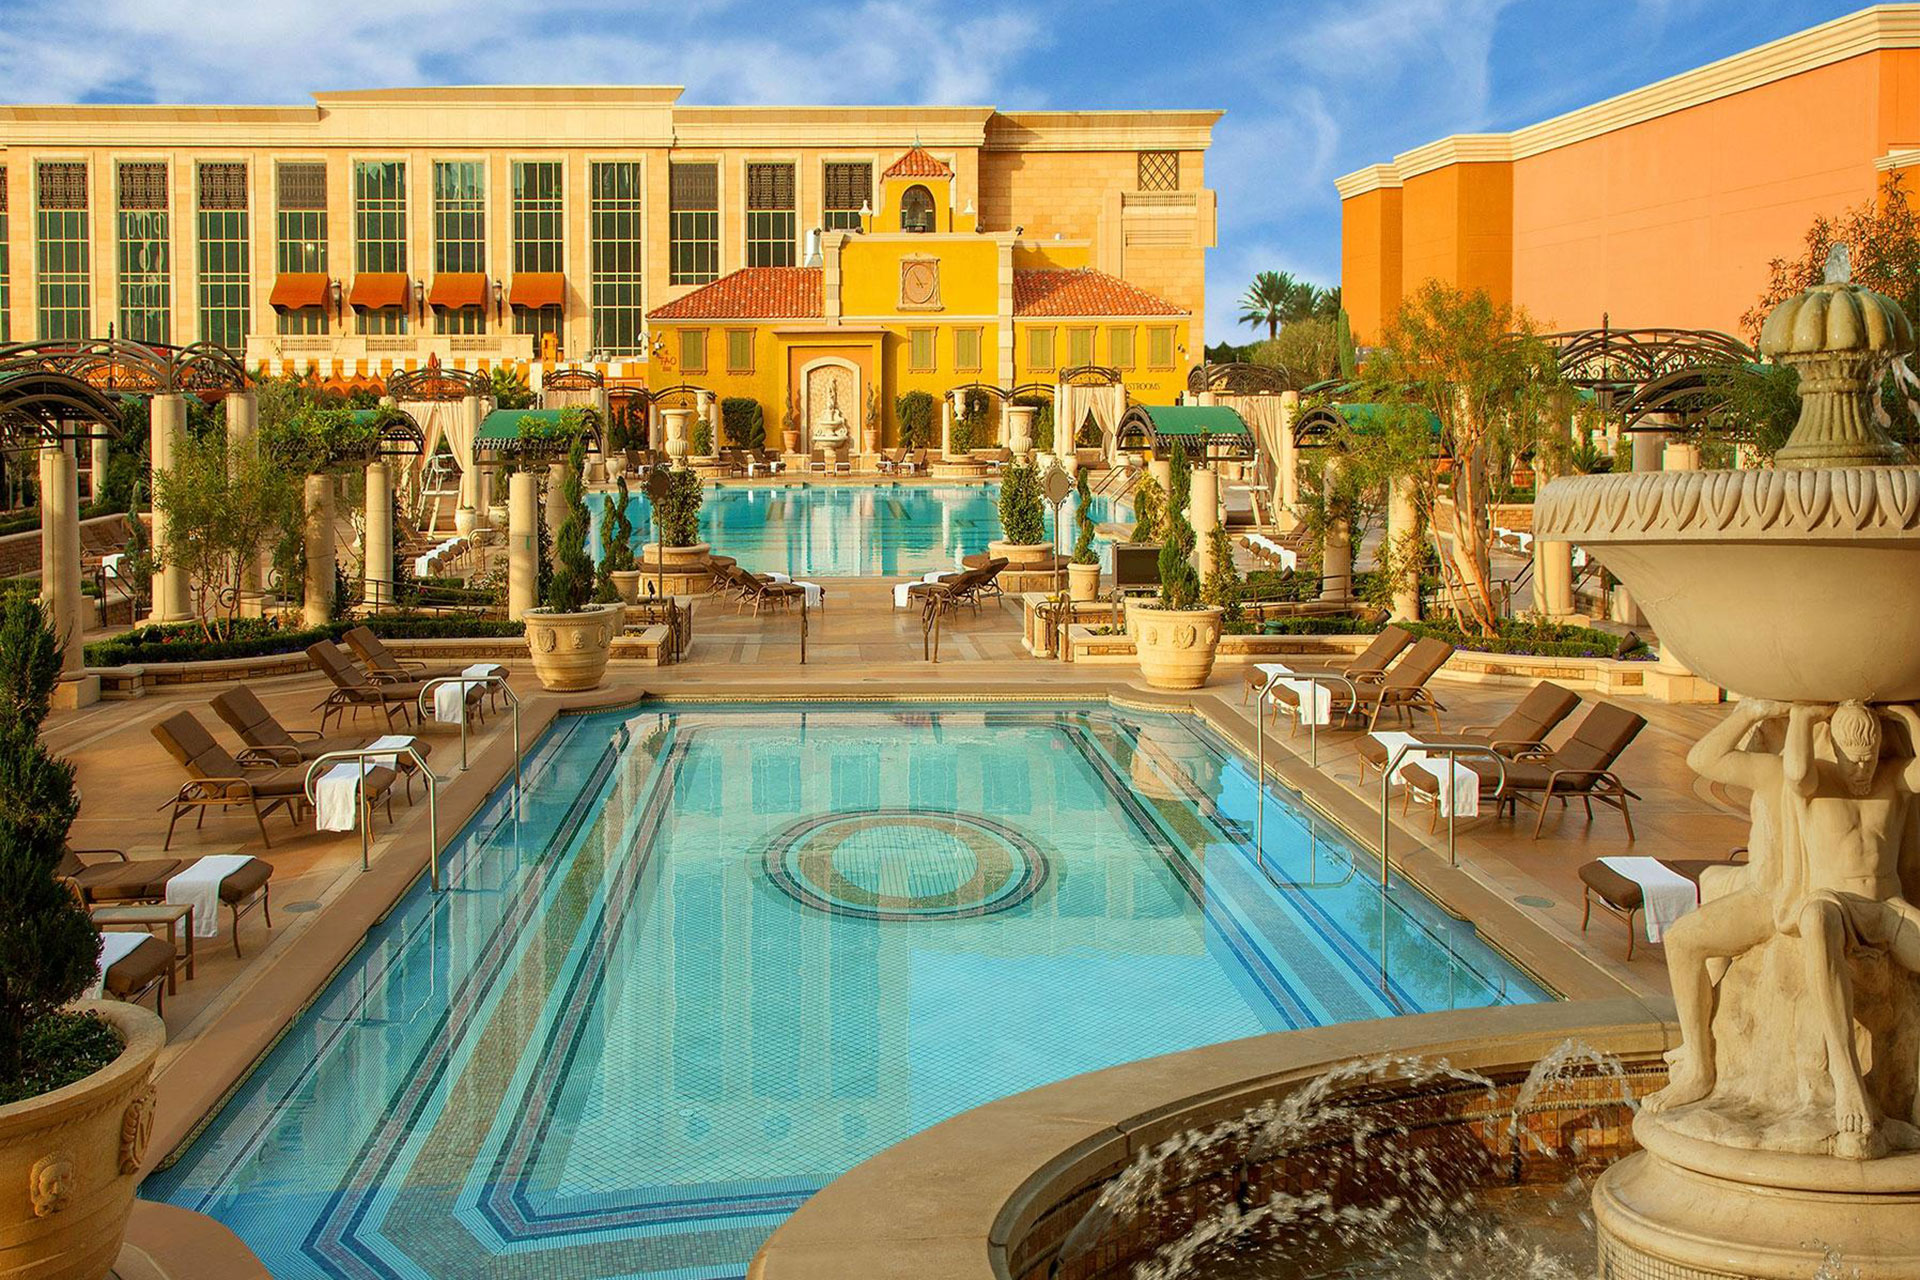 7 BEST FAMILY HOTELS in Las Vegas - Where To Stay with Kids